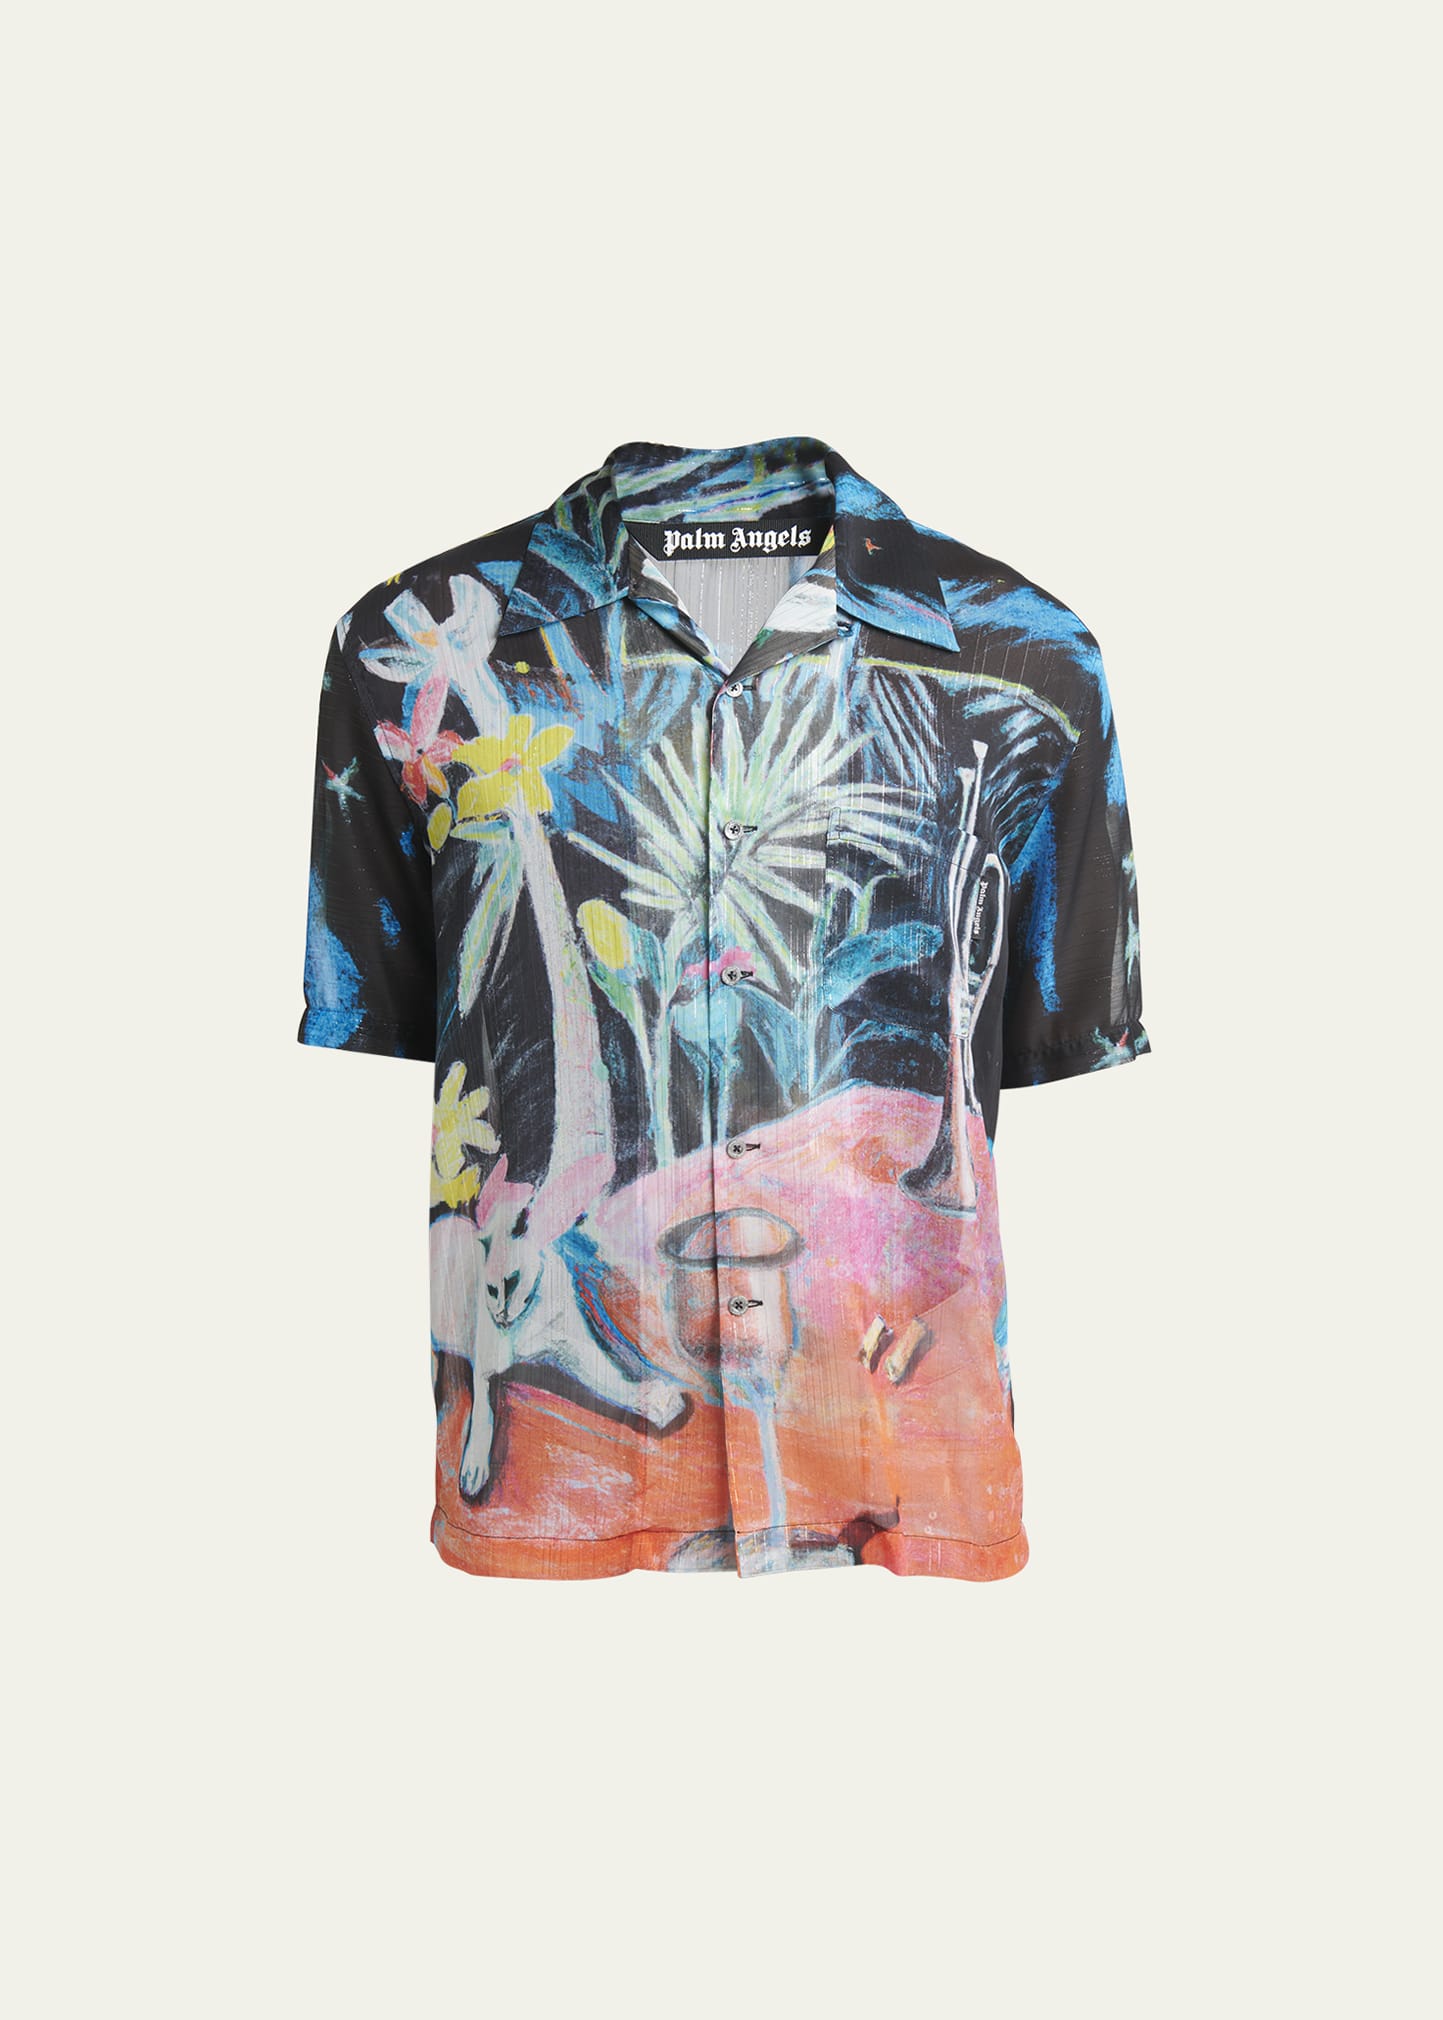 PALM ANGELS MEN'S SHEER OIL ON CANVAS CAMP SHIRT